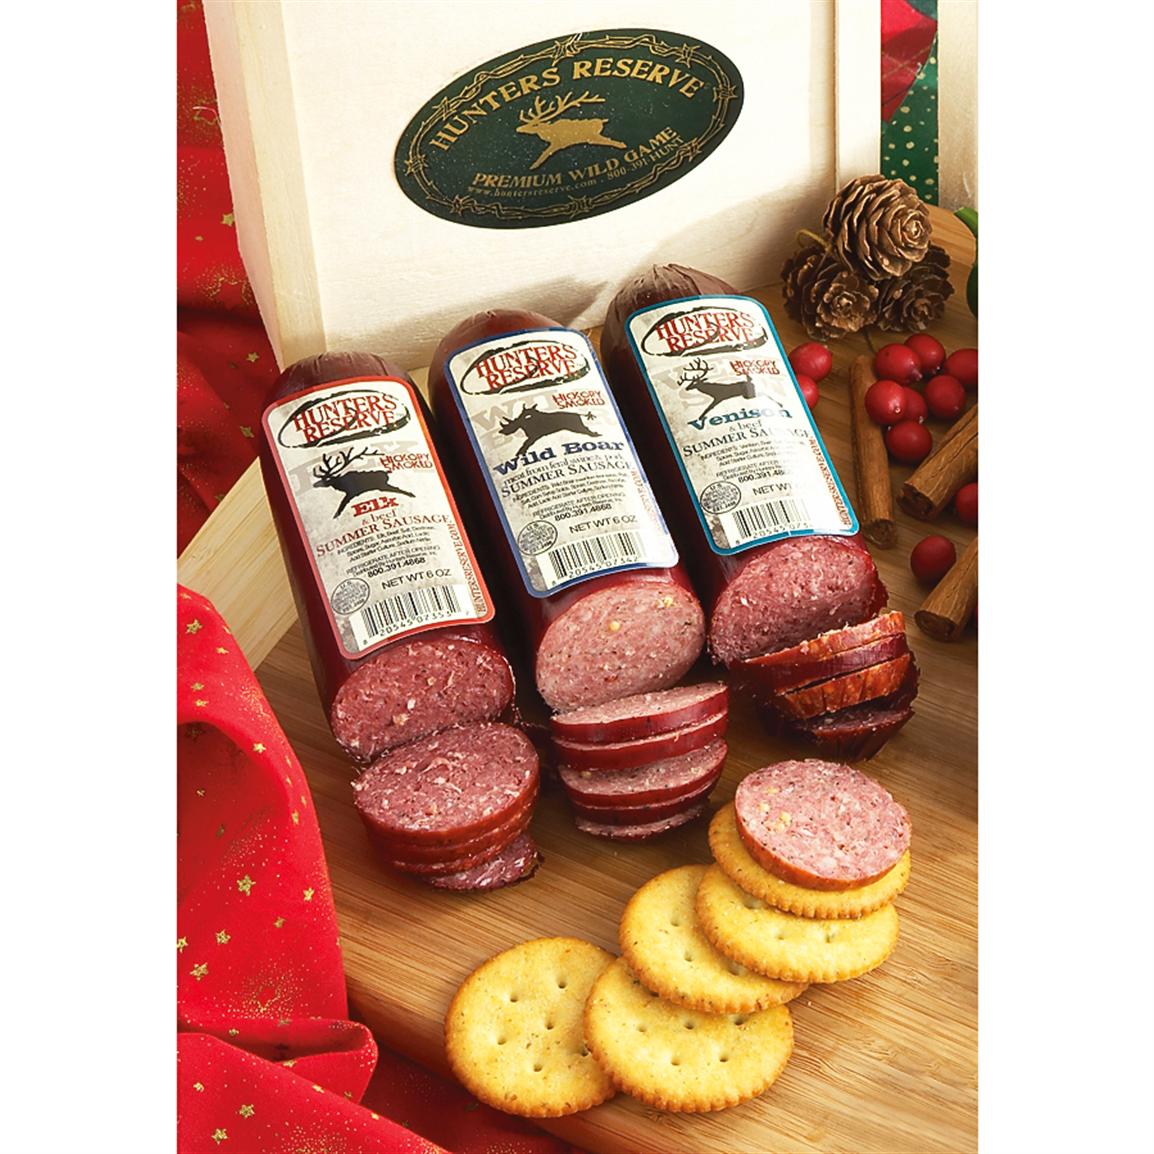 Hunters Reserve™ Wild Game Sausage and Cheese Gift Box